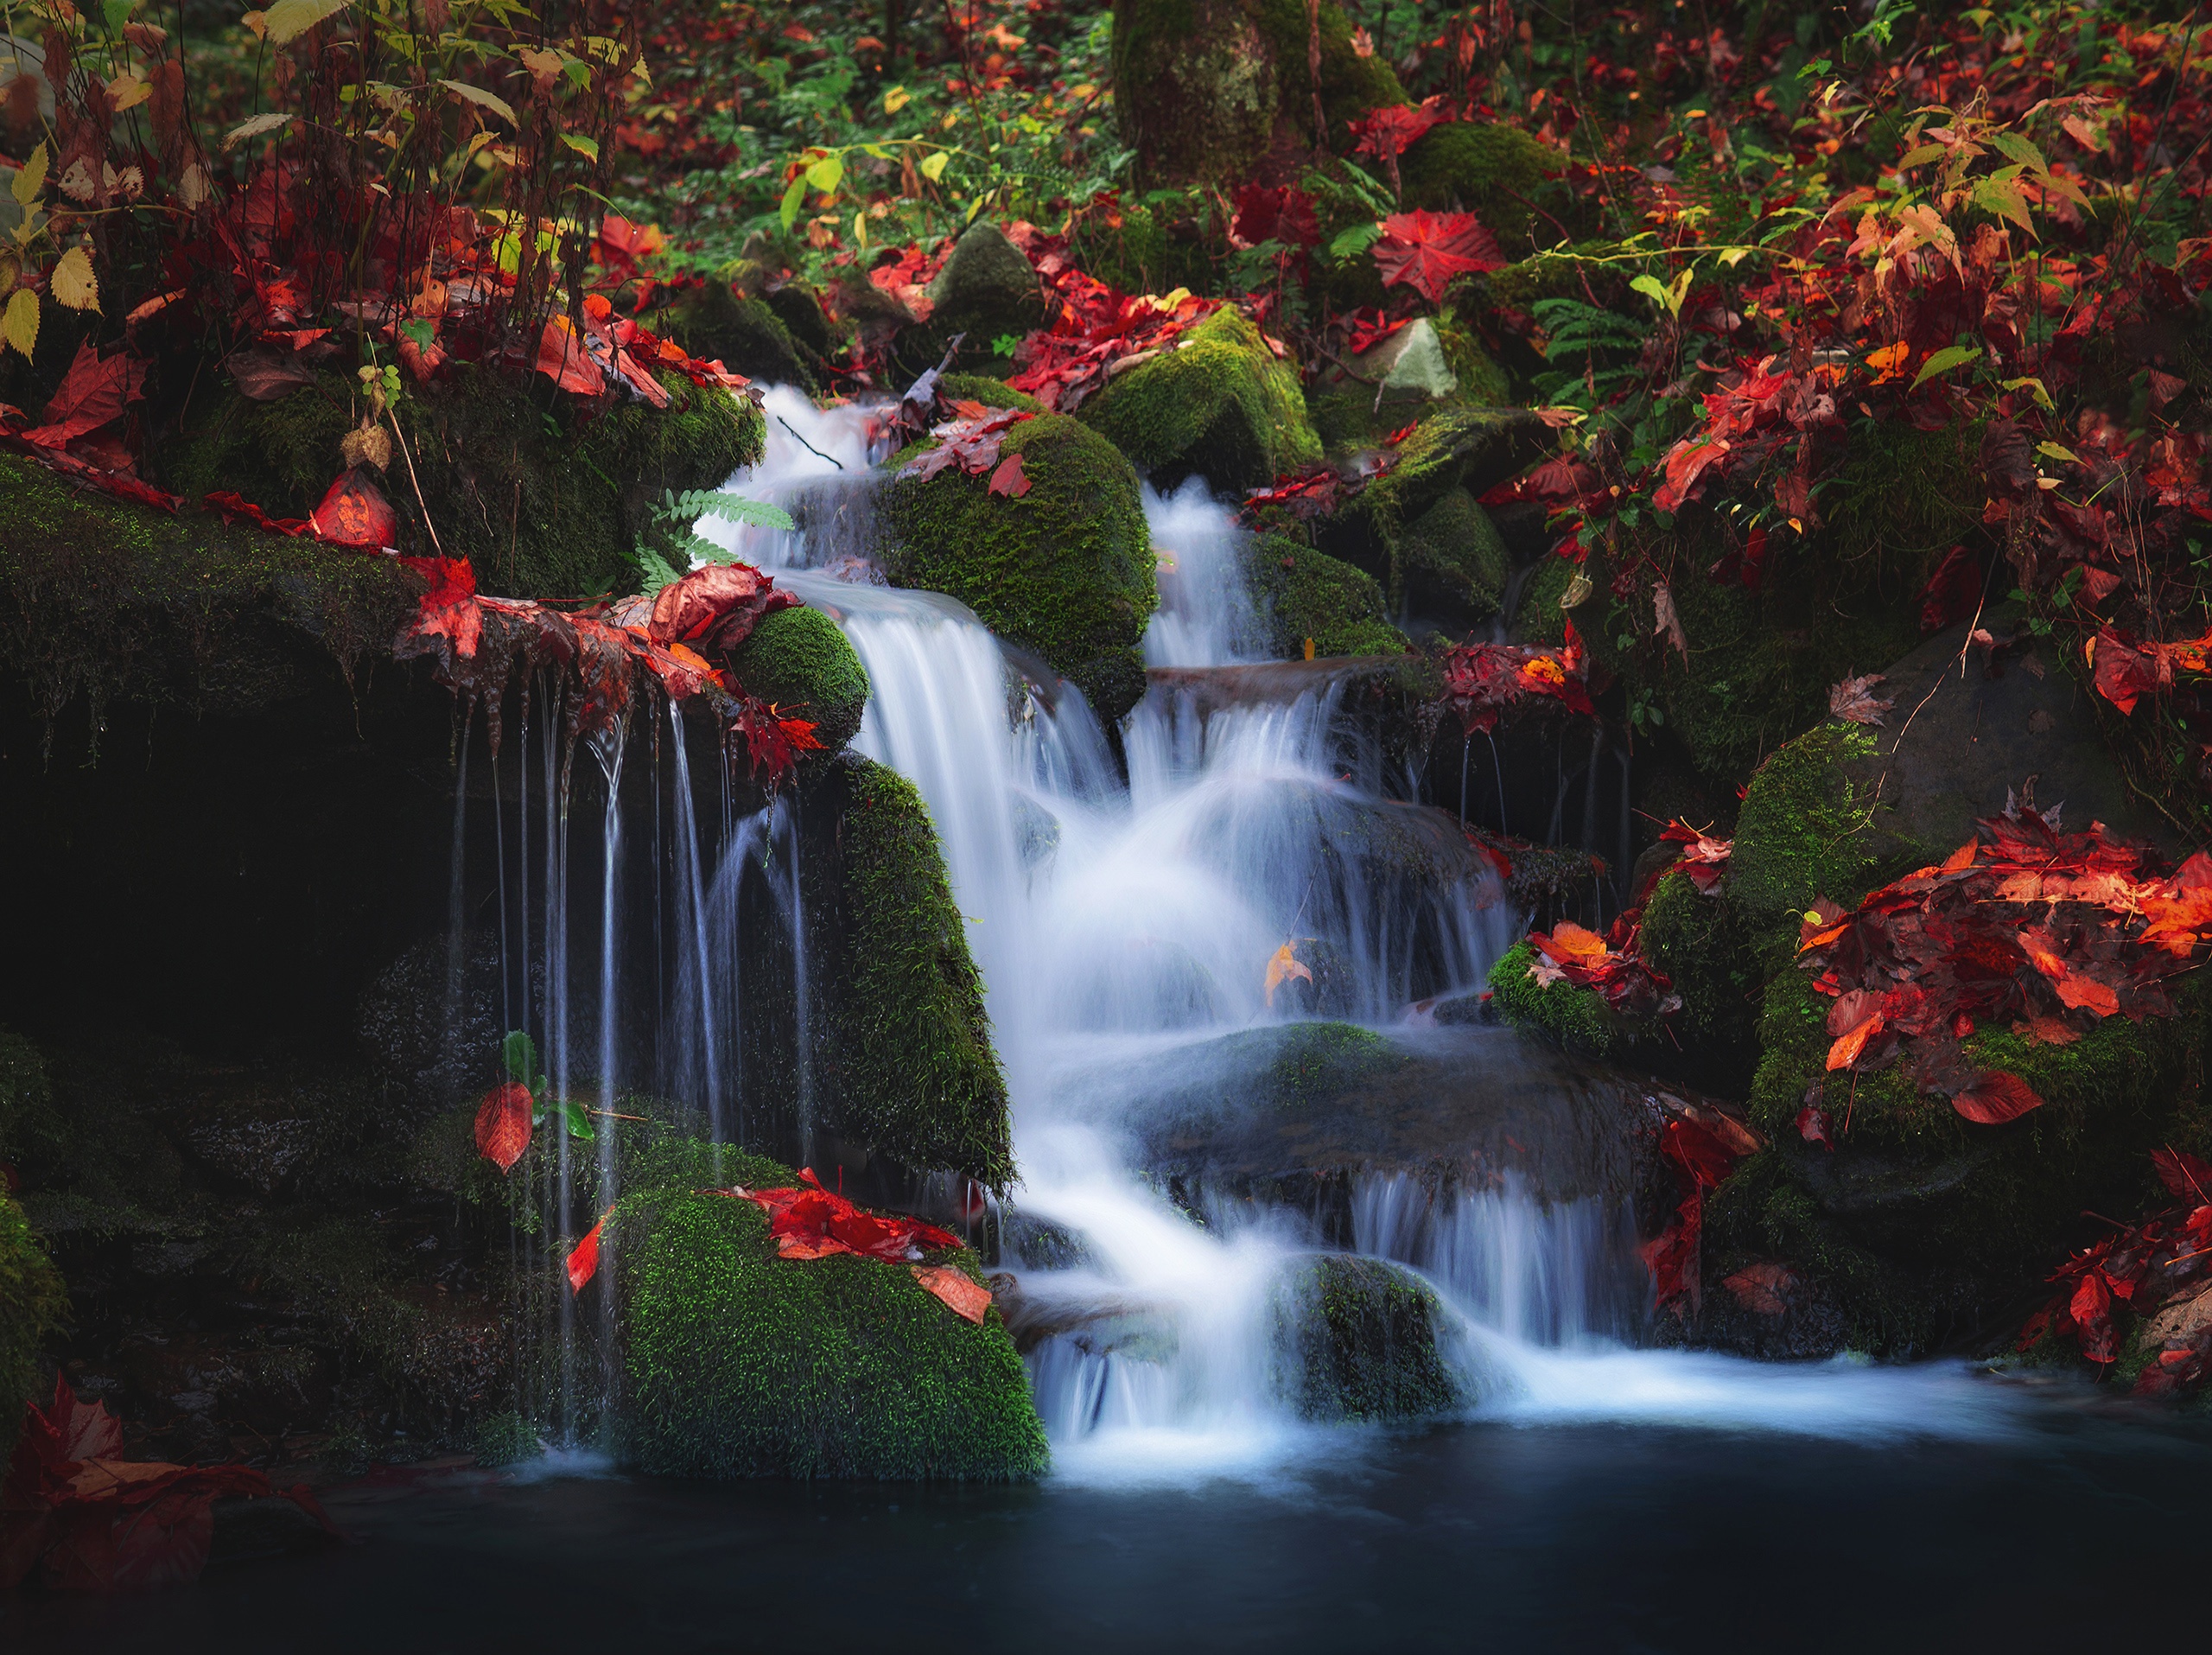 Amazing In Nature Beautiful Waterfall At Colorful Autumn Forest In Fall  Season Stock Photo  Download Image Now  iStock